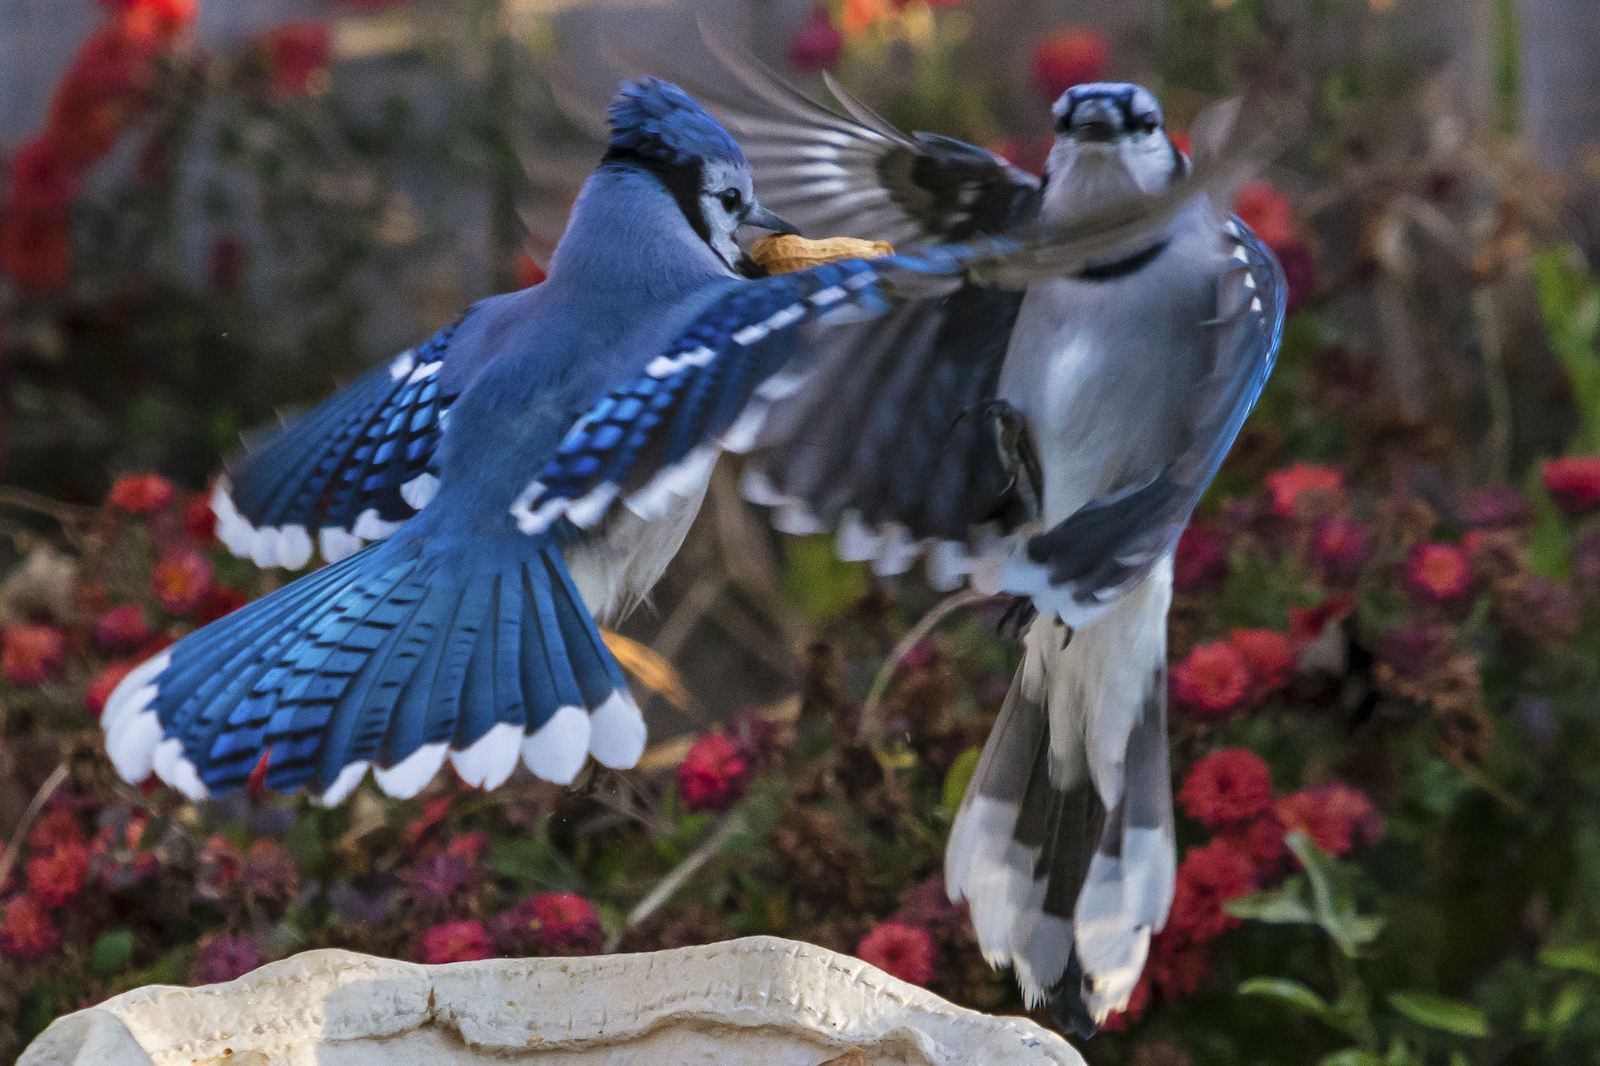 Two blue jays fight over a peanut.